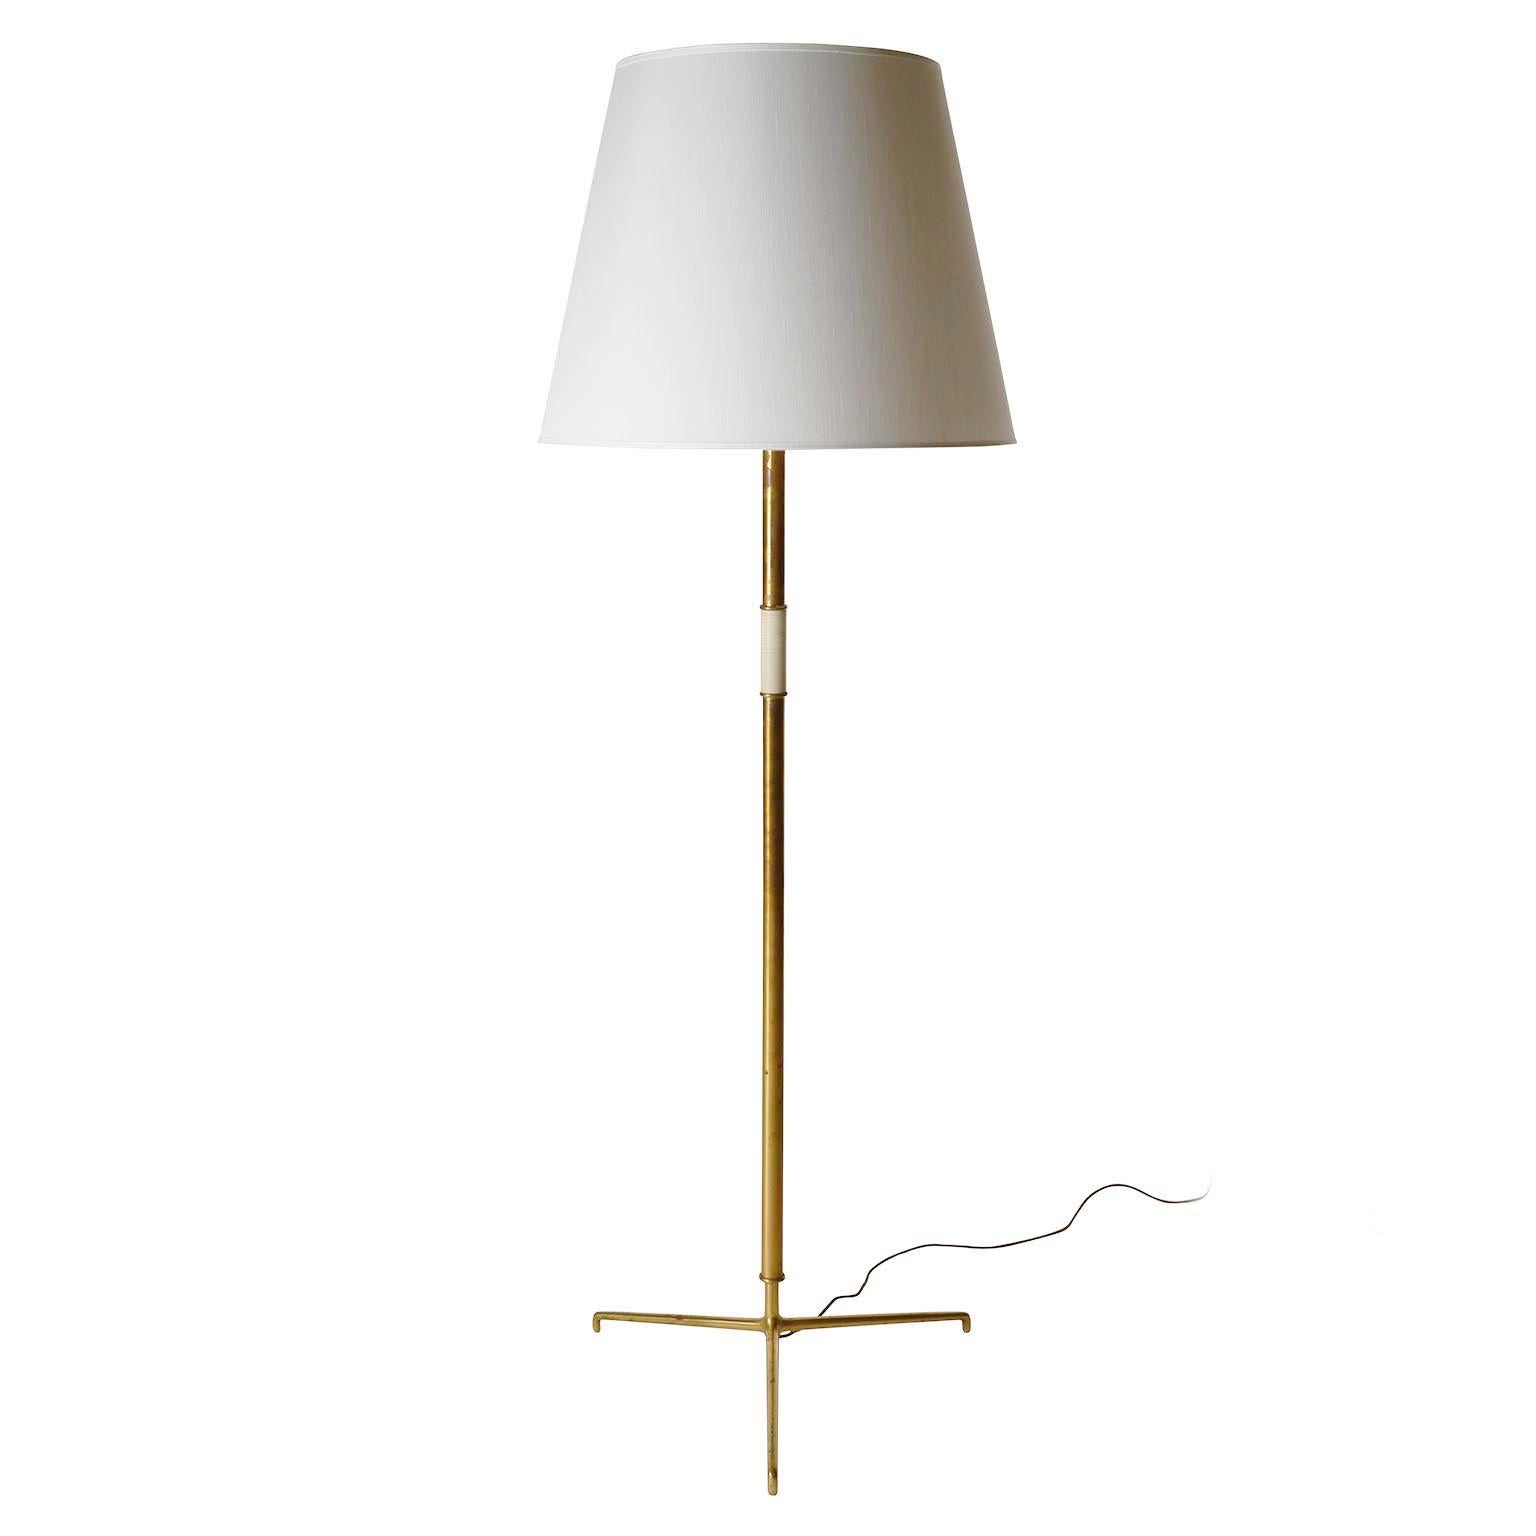 A pair of large brass floor lamps model 'Helios' no. 2035 manufactured by J.T. Kalmar in midcentury, circa 1960.
The lamp is documented in the Kalmar catalogue from the 1950s as well as in the catalogue from the 1960s. It was the most expensive